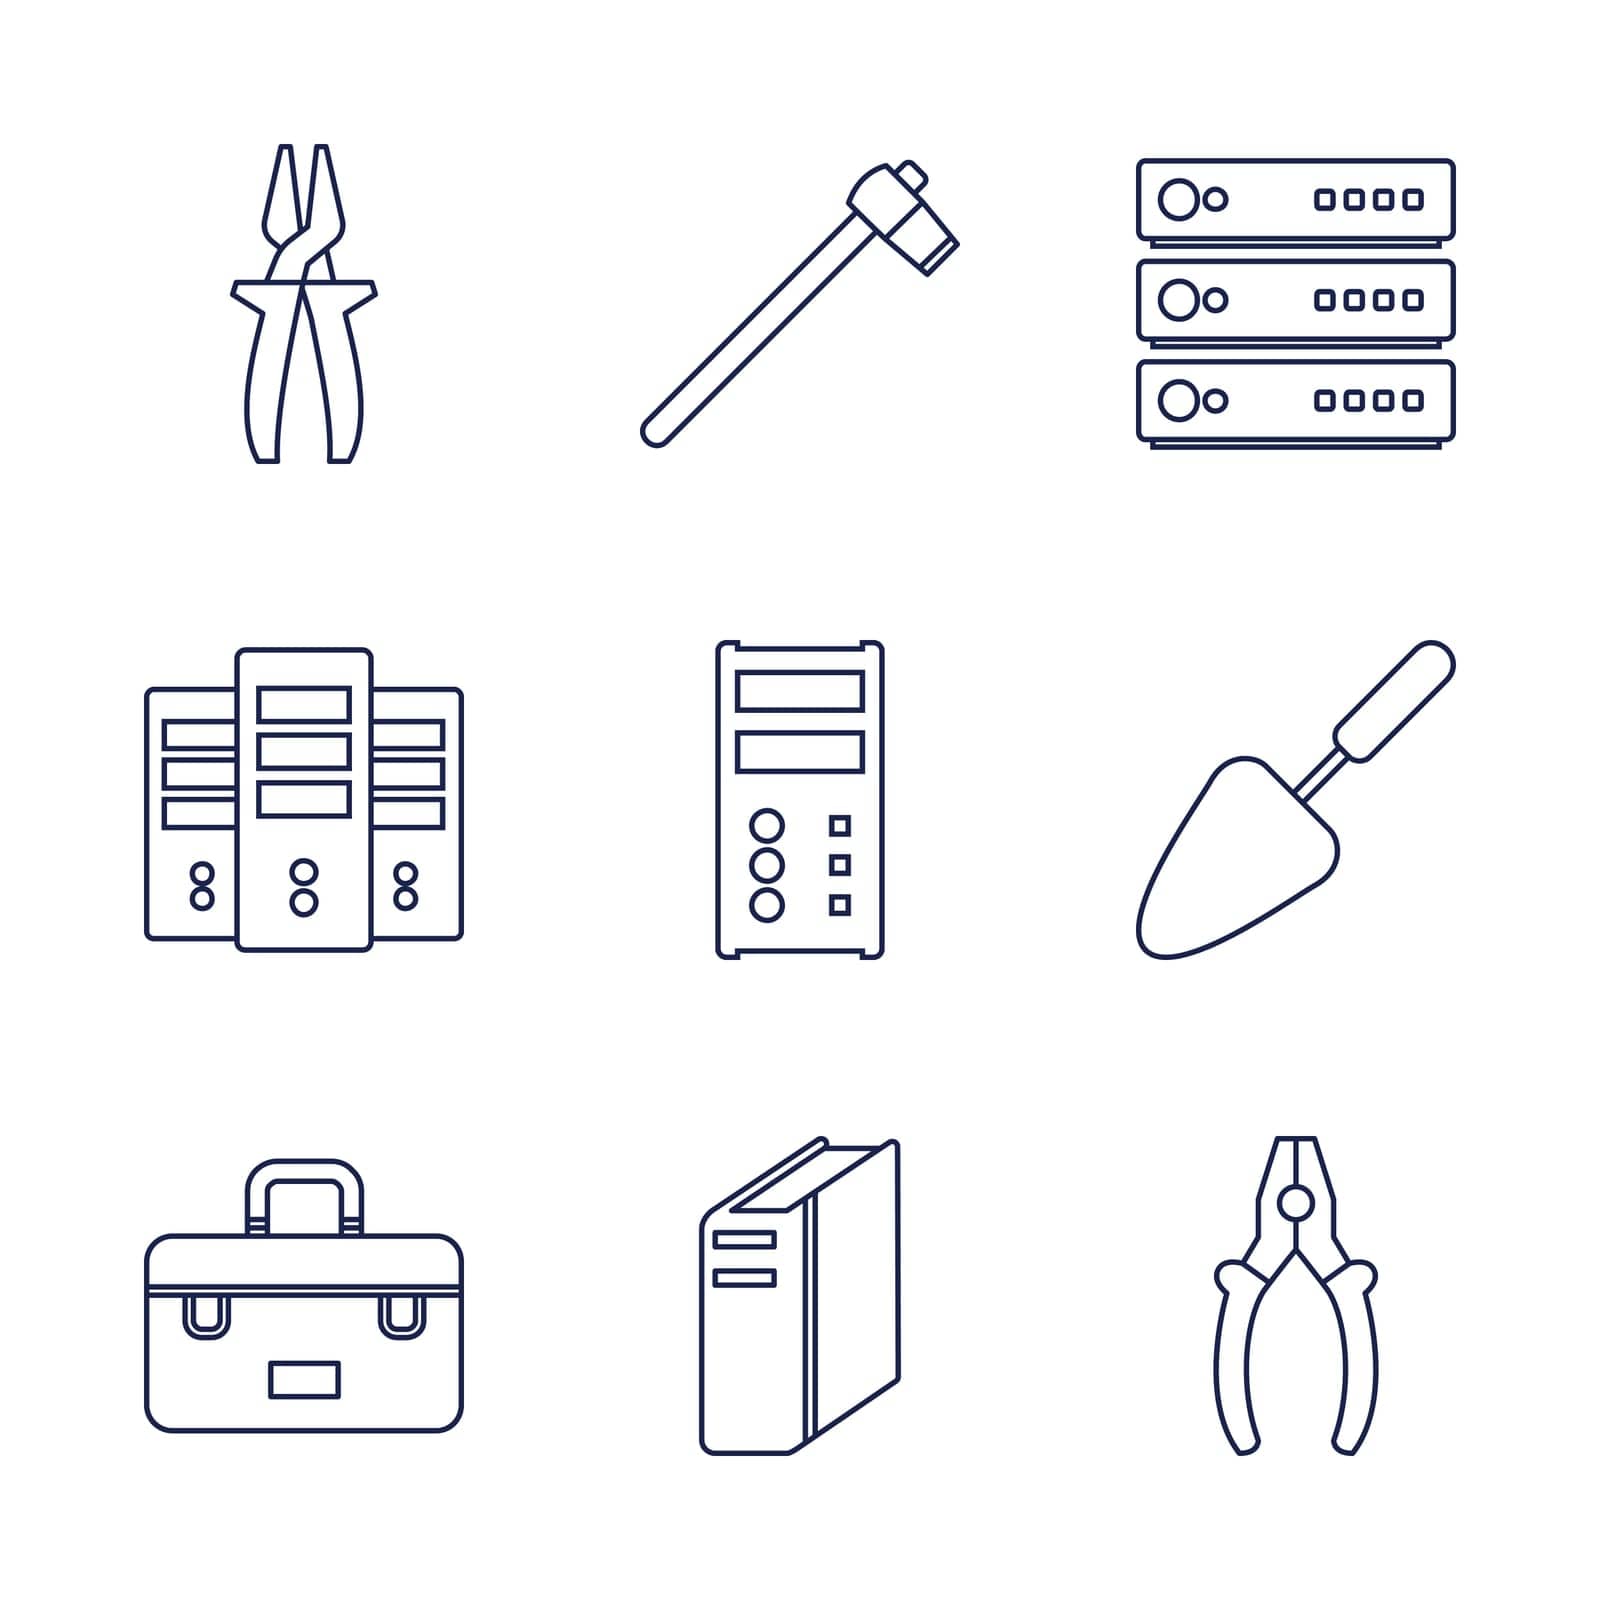 symbol,repair,server,backup,access,hammer,hosting,concept,icon,sign,isolated,remote,network,professional,computer,modern,fix,web,design,pliers,lock,construction,connection,vector,hardware,trowel,set,business,work,metal,equipment,cpu,technology,tool,system,background,toolbox,garden,information,illustration,device,internet,object